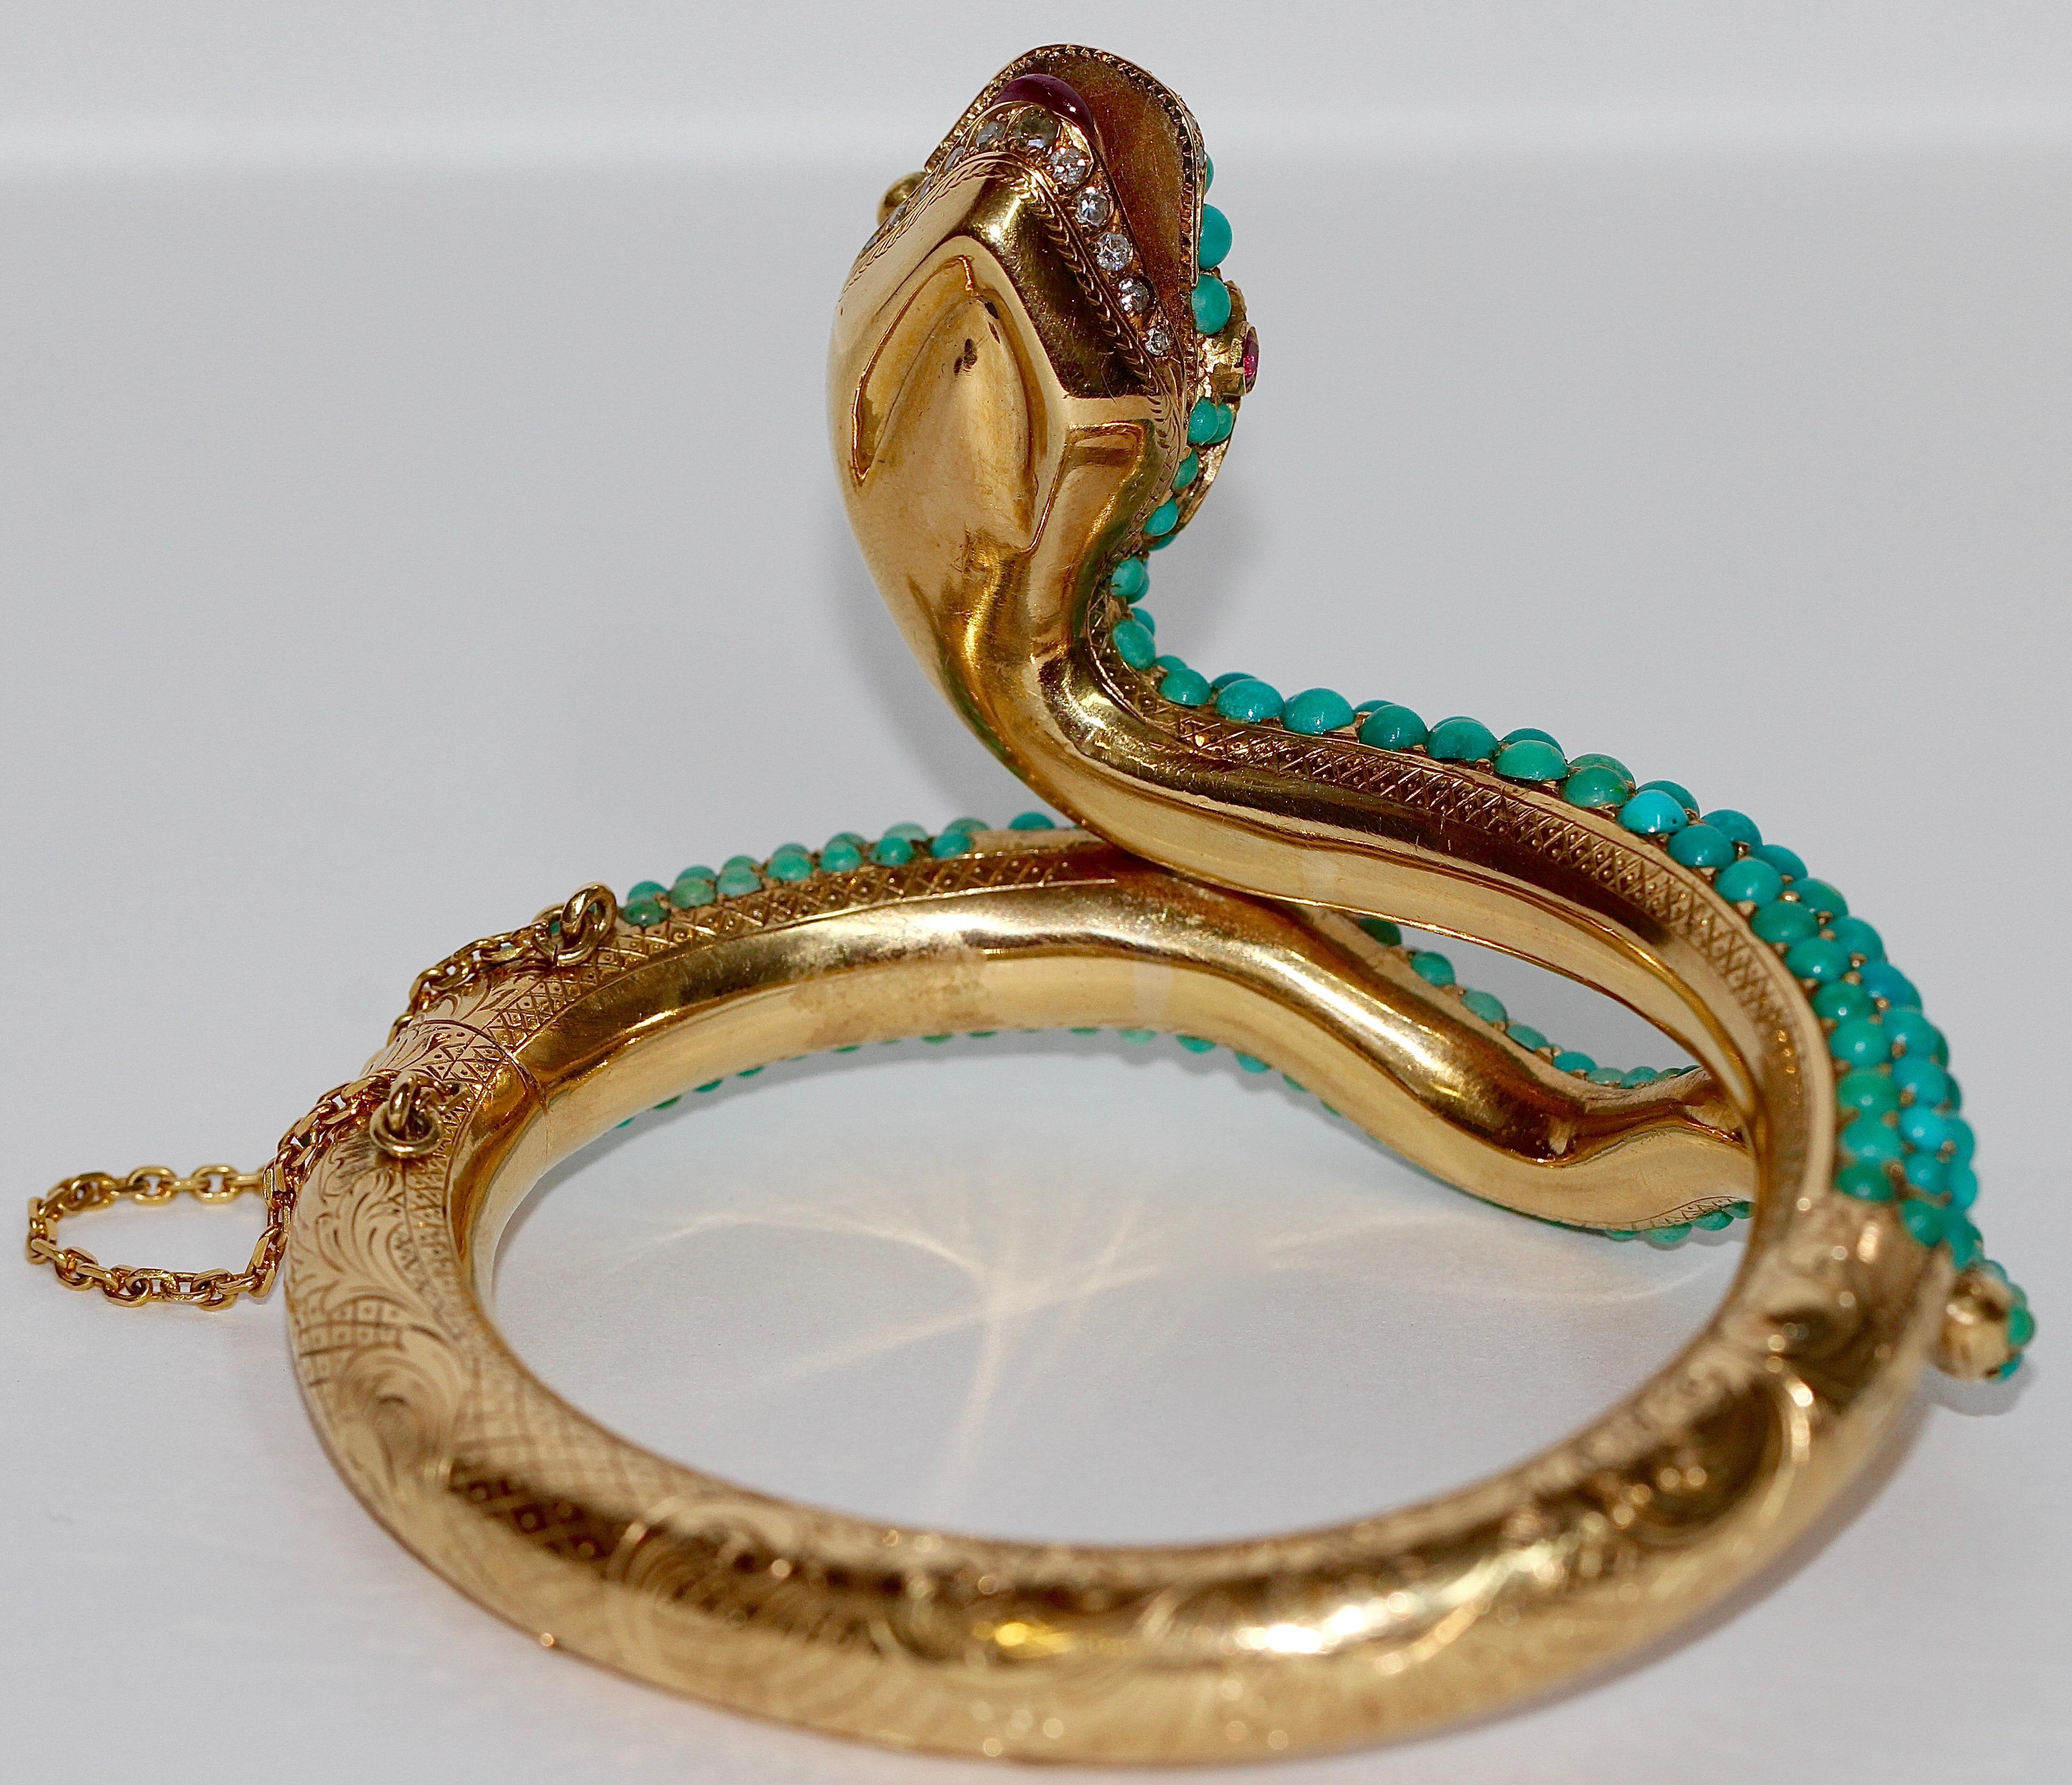 18 Karat Gold Snake Bracelet Bangle Set with Turquoise, Diamonds and Rubies In Excellent Condition For Sale In Berlin, DE